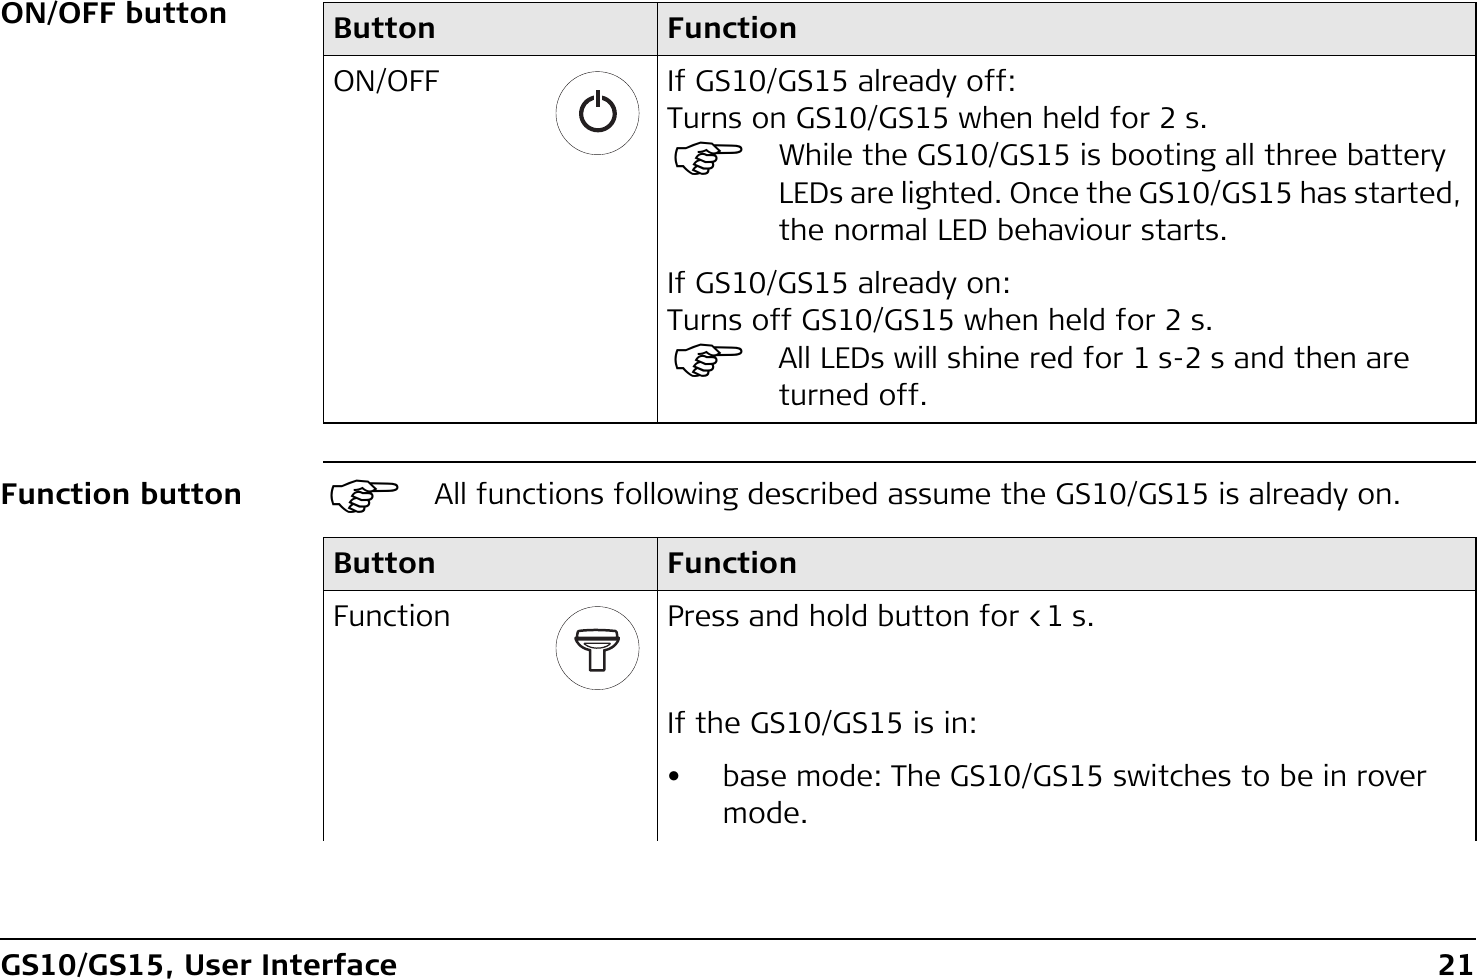 GS10/GS15, User Interface 21ON/OFF buttonFunction button )All functions following described assume the GS10/GS15 is already on.Button FunctionON/OFF If GS10/GS15 already off:Turns on GS10/GS15 when held for 2 s.)While the GS10/GS15 is booting all three battery LEDs are lighted. Once the GS10/GS15 has started, the normal LED behaviour starts.If GS10/GS15 already on:Turns off GS10/GS15 when held for 2 s.)All LEDs will shine red for 1 s-2 s and then are turned off.Button FunctionFunction Press and hold button for &lt;1 s.If the GS10/GS15 is in:• base mode: The GS10/GS15 switches to be in rover mode.